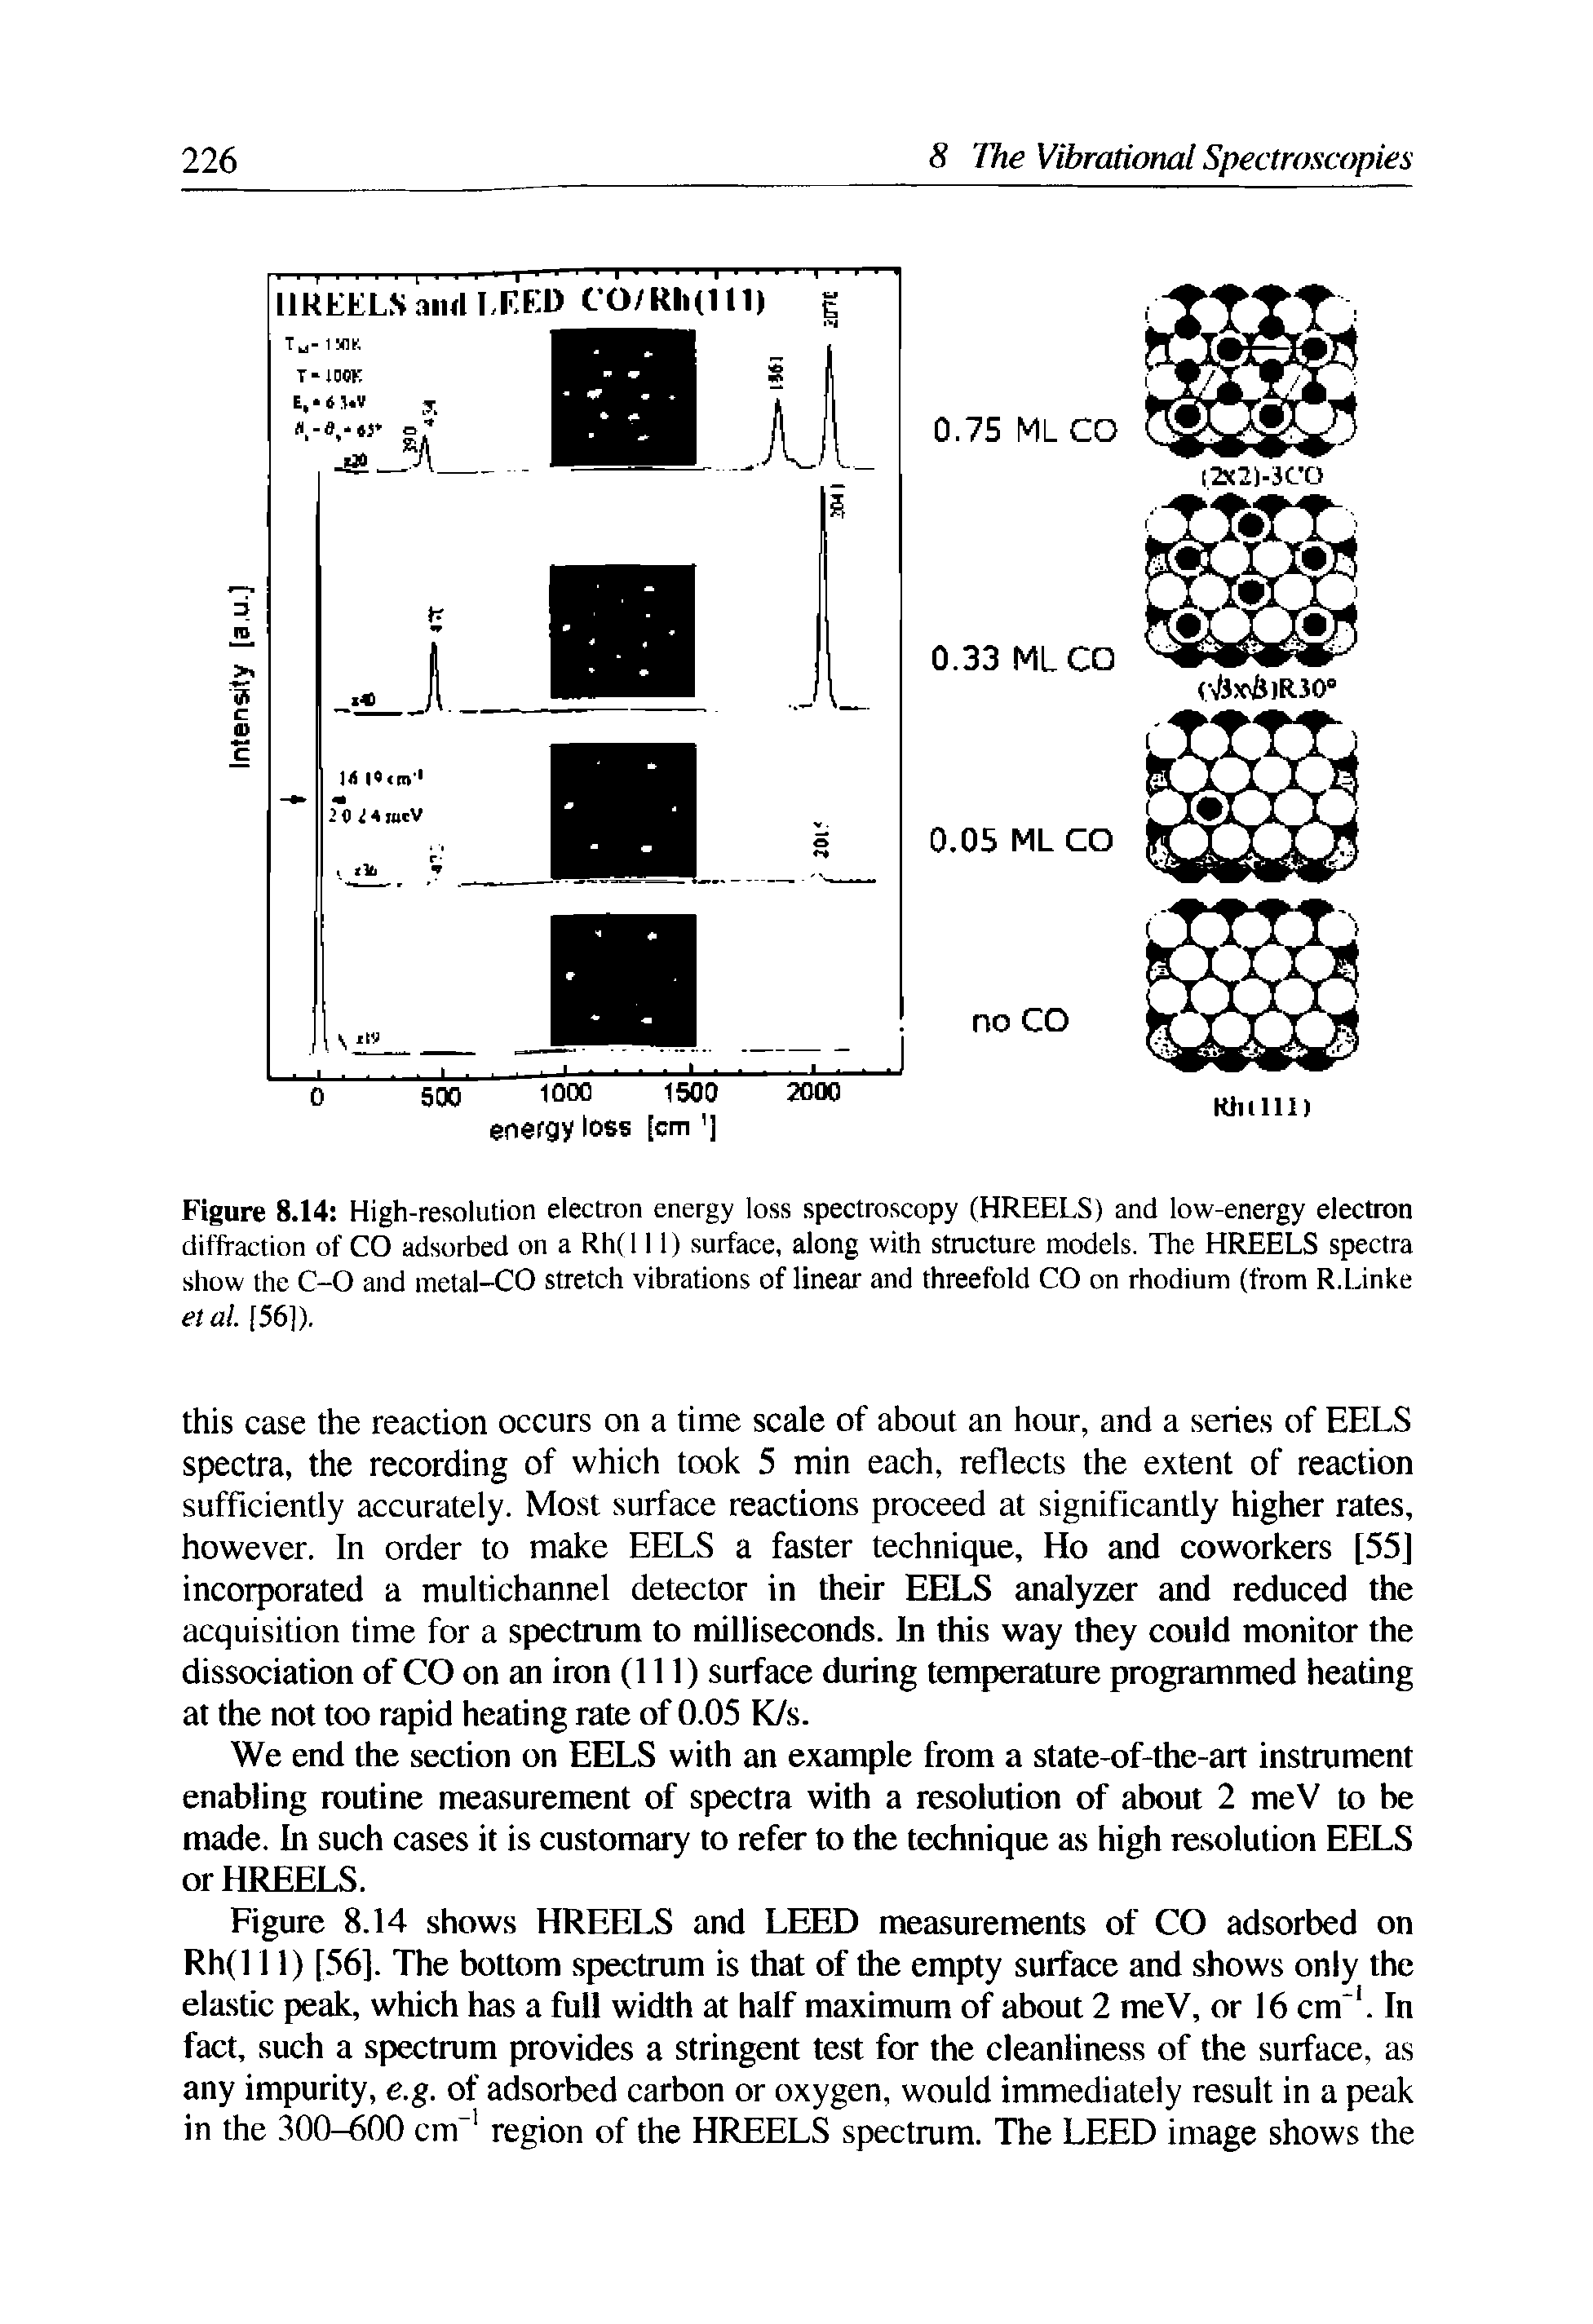 Figure 8.14 High-resolution electron energy loss spectroscopy (HREELS) and low-energy electron diffraction of CO adsorbed on a Rh(l 11) surface, along with structure models. The HREELS spectra show the C-O and metal-CO stretch vibrations of linear and threefold CO on rhodium (from R.Linke etal. [56]).